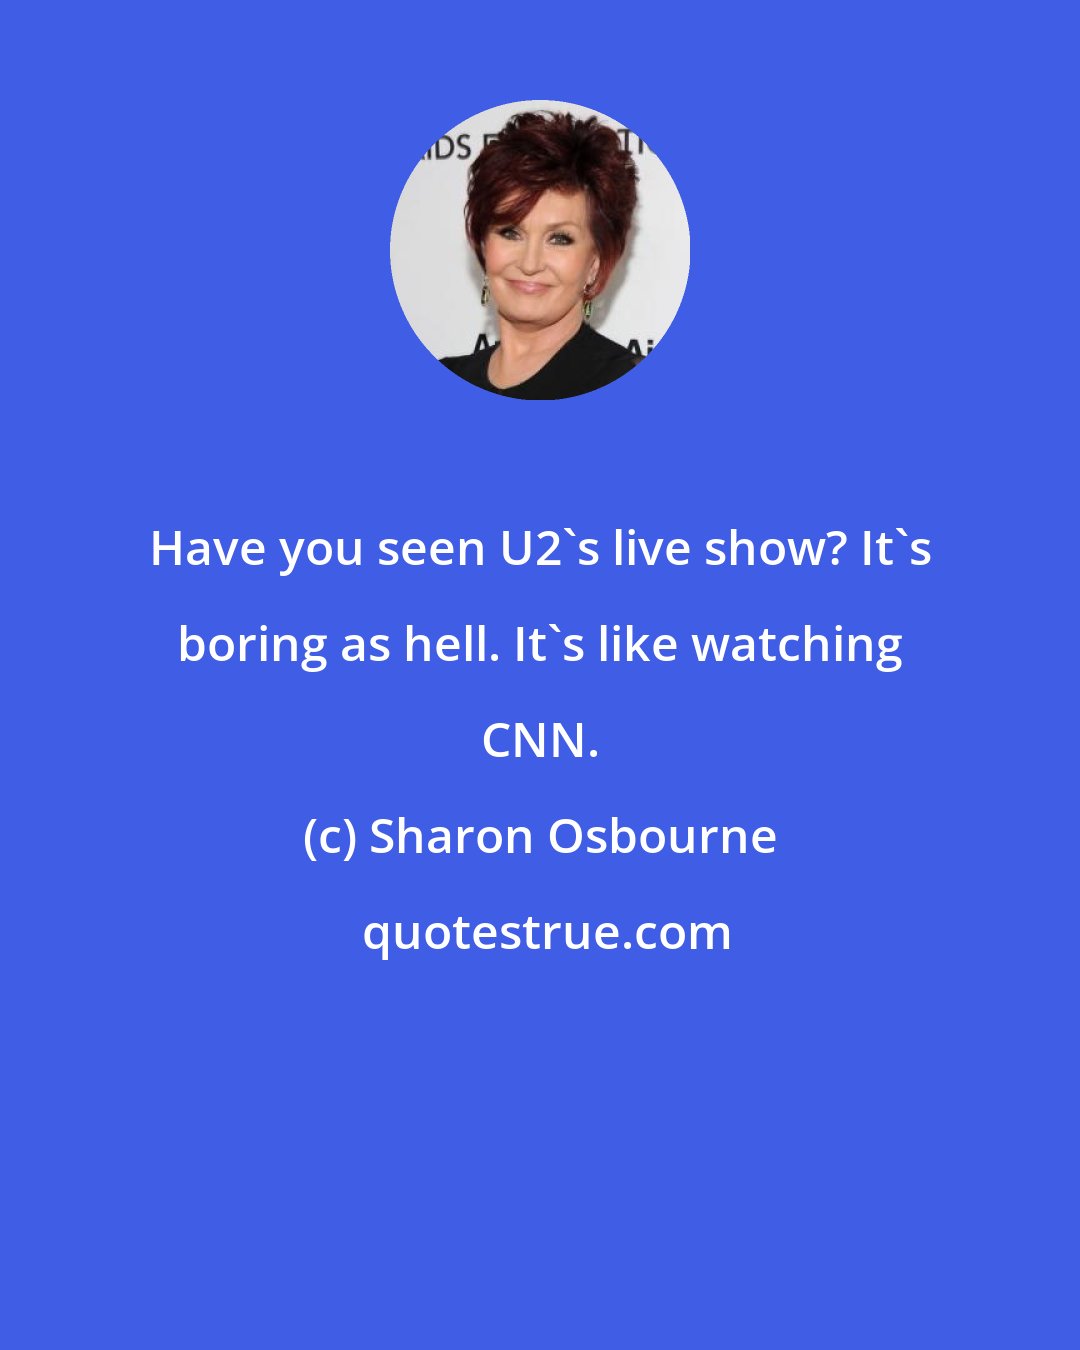 Sharon Osbourne: Have you seen U2's live show? It's boring as hell. It's like watching CNN.